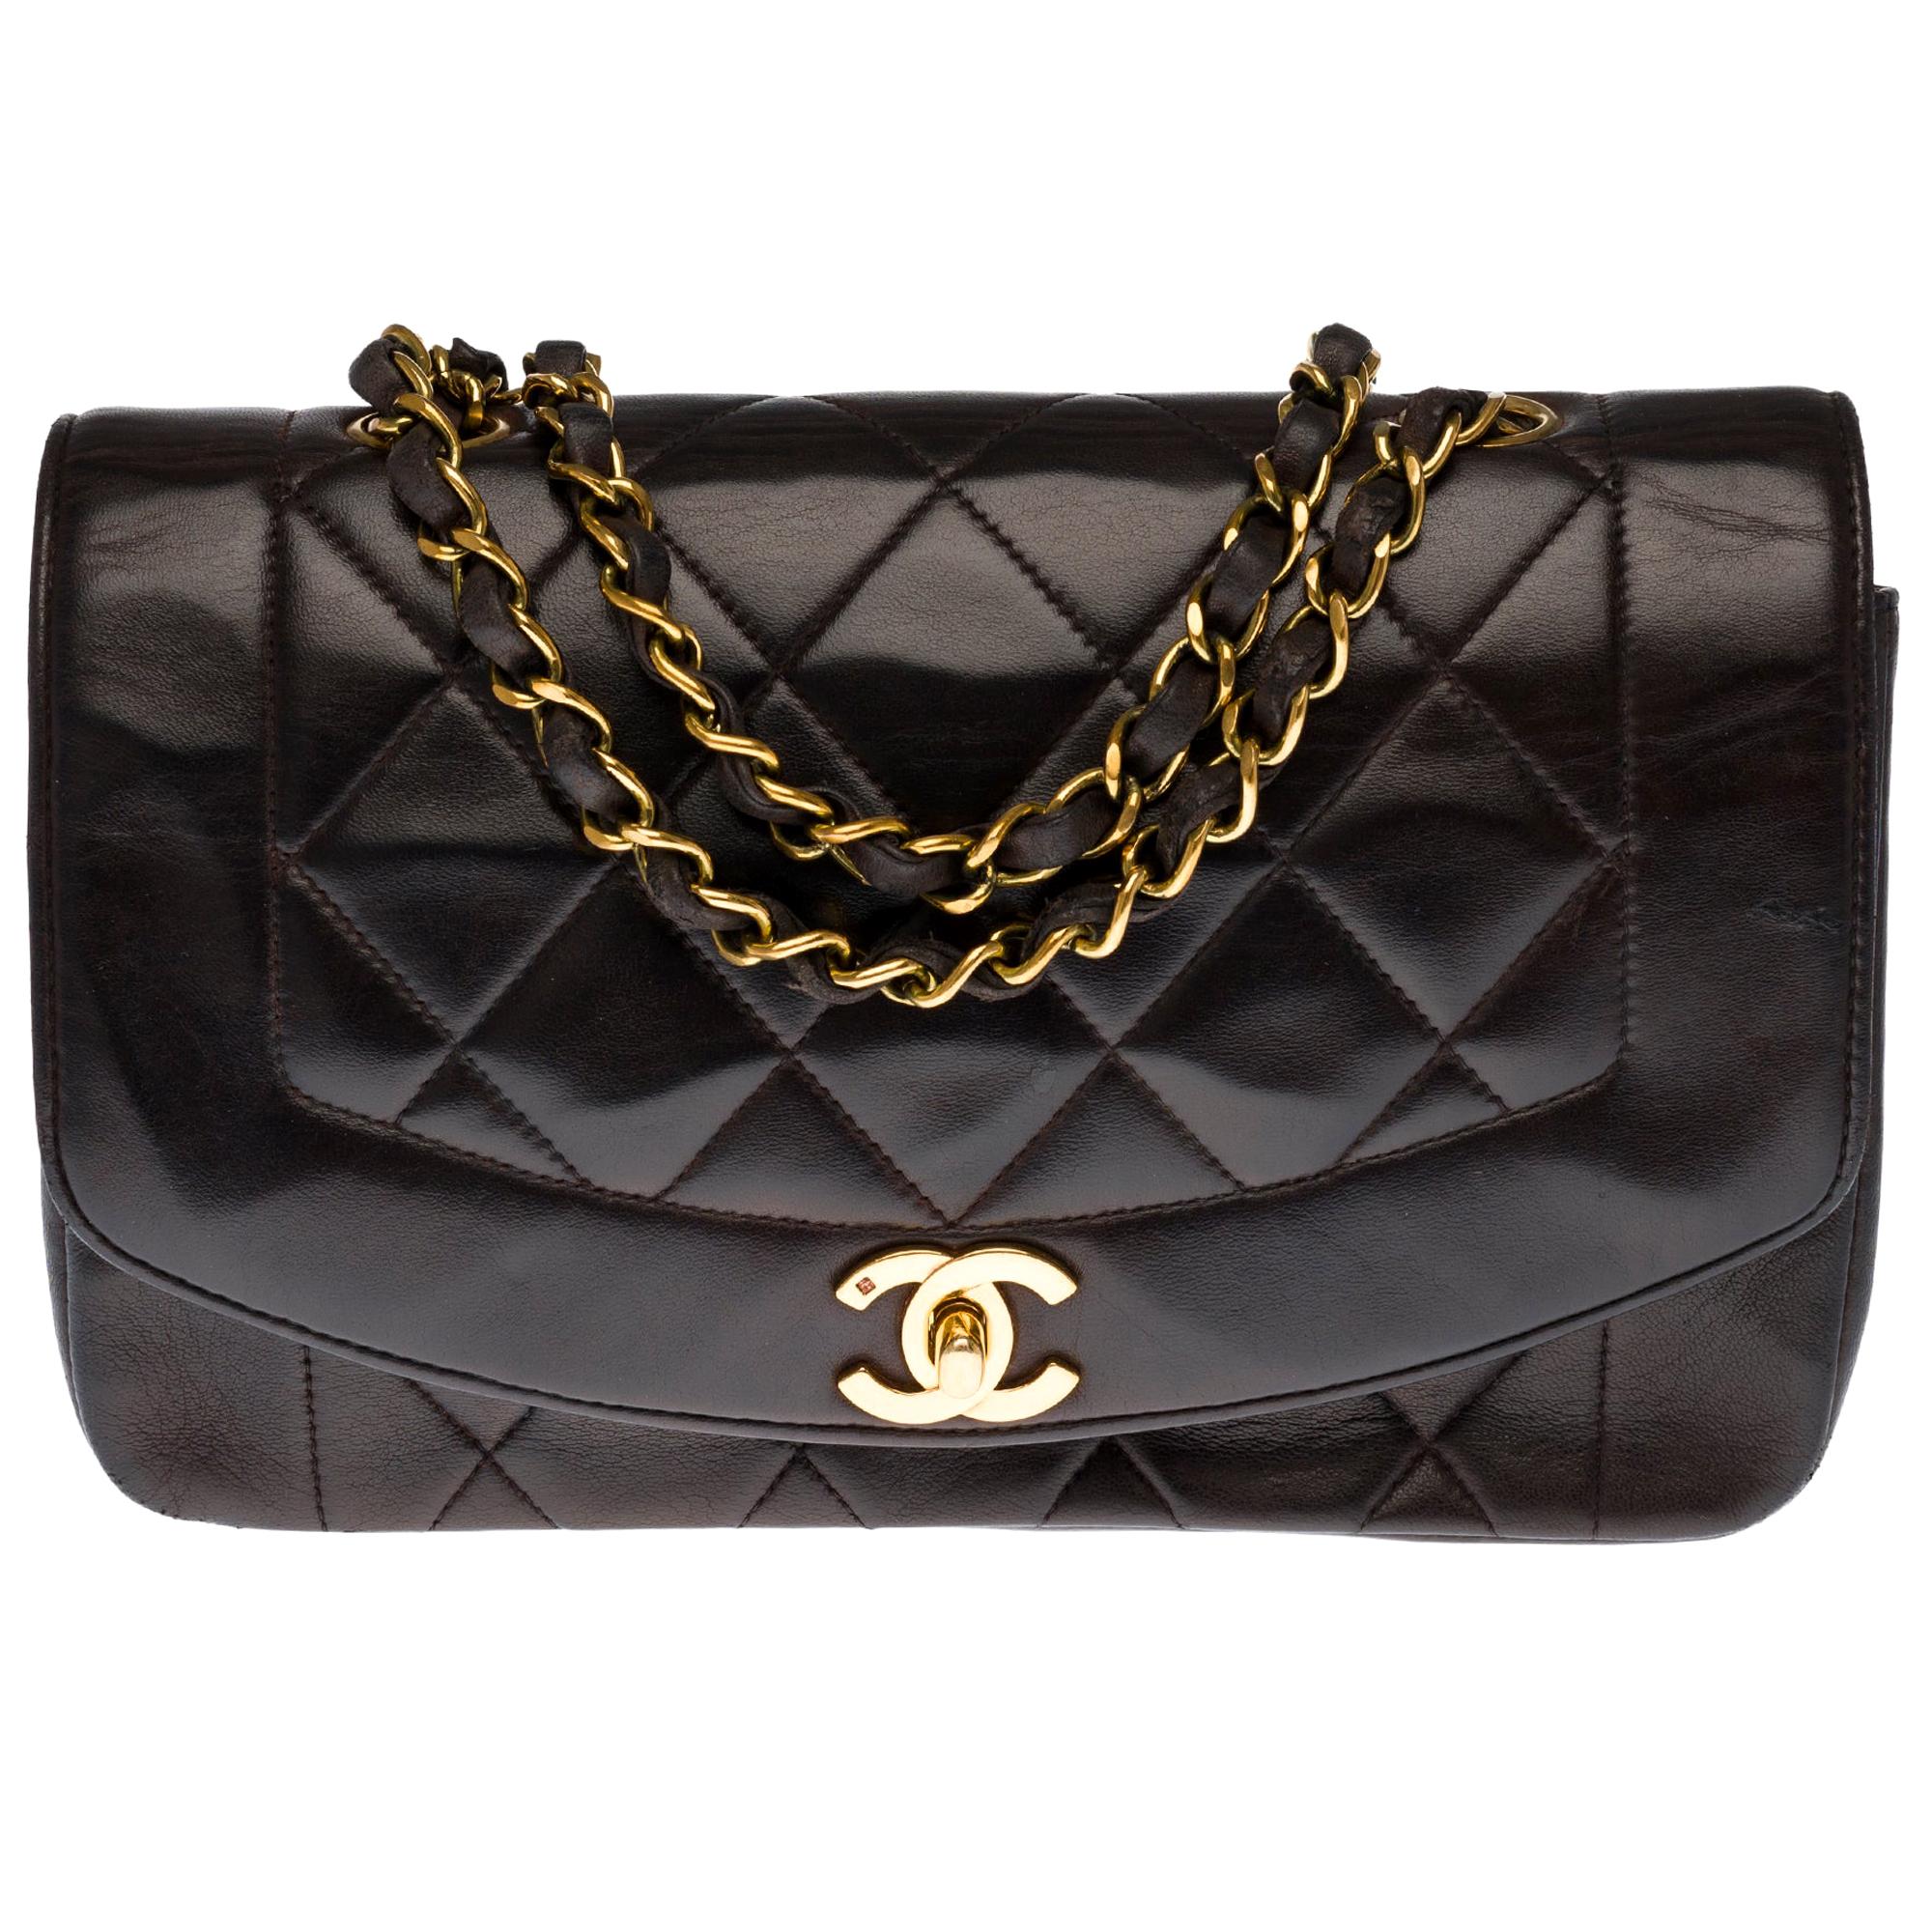 Chanel White Leather vintage Diana Flap Bag Chanel